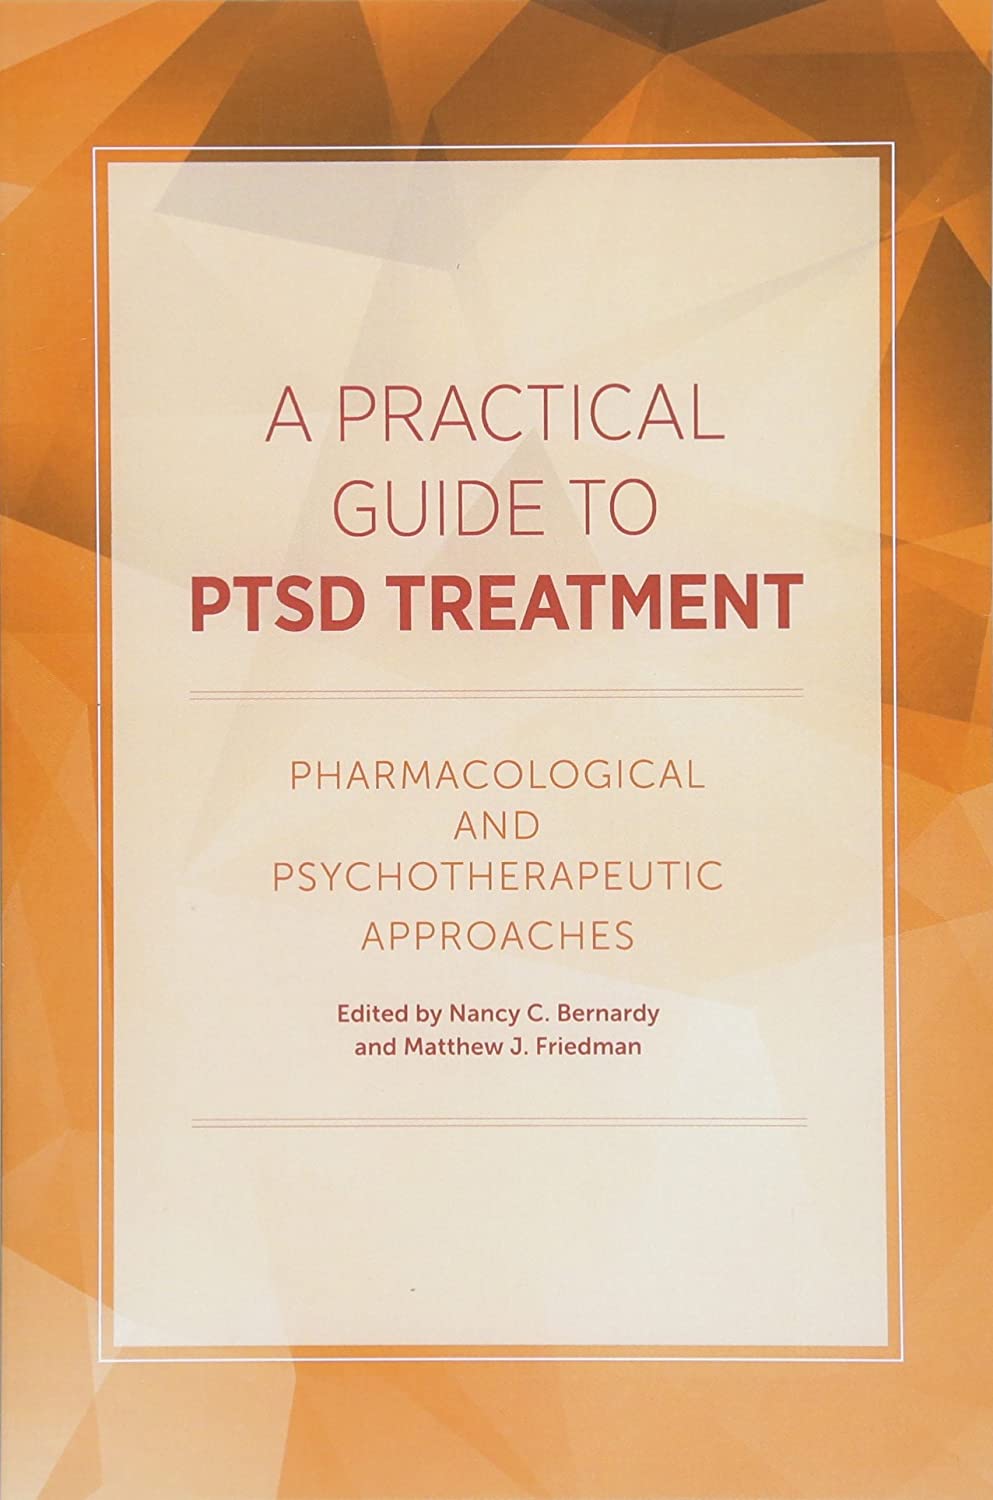 A Practical Guide to PTSD Treatment: Pharmacological and Psychotherapeutic Approaches